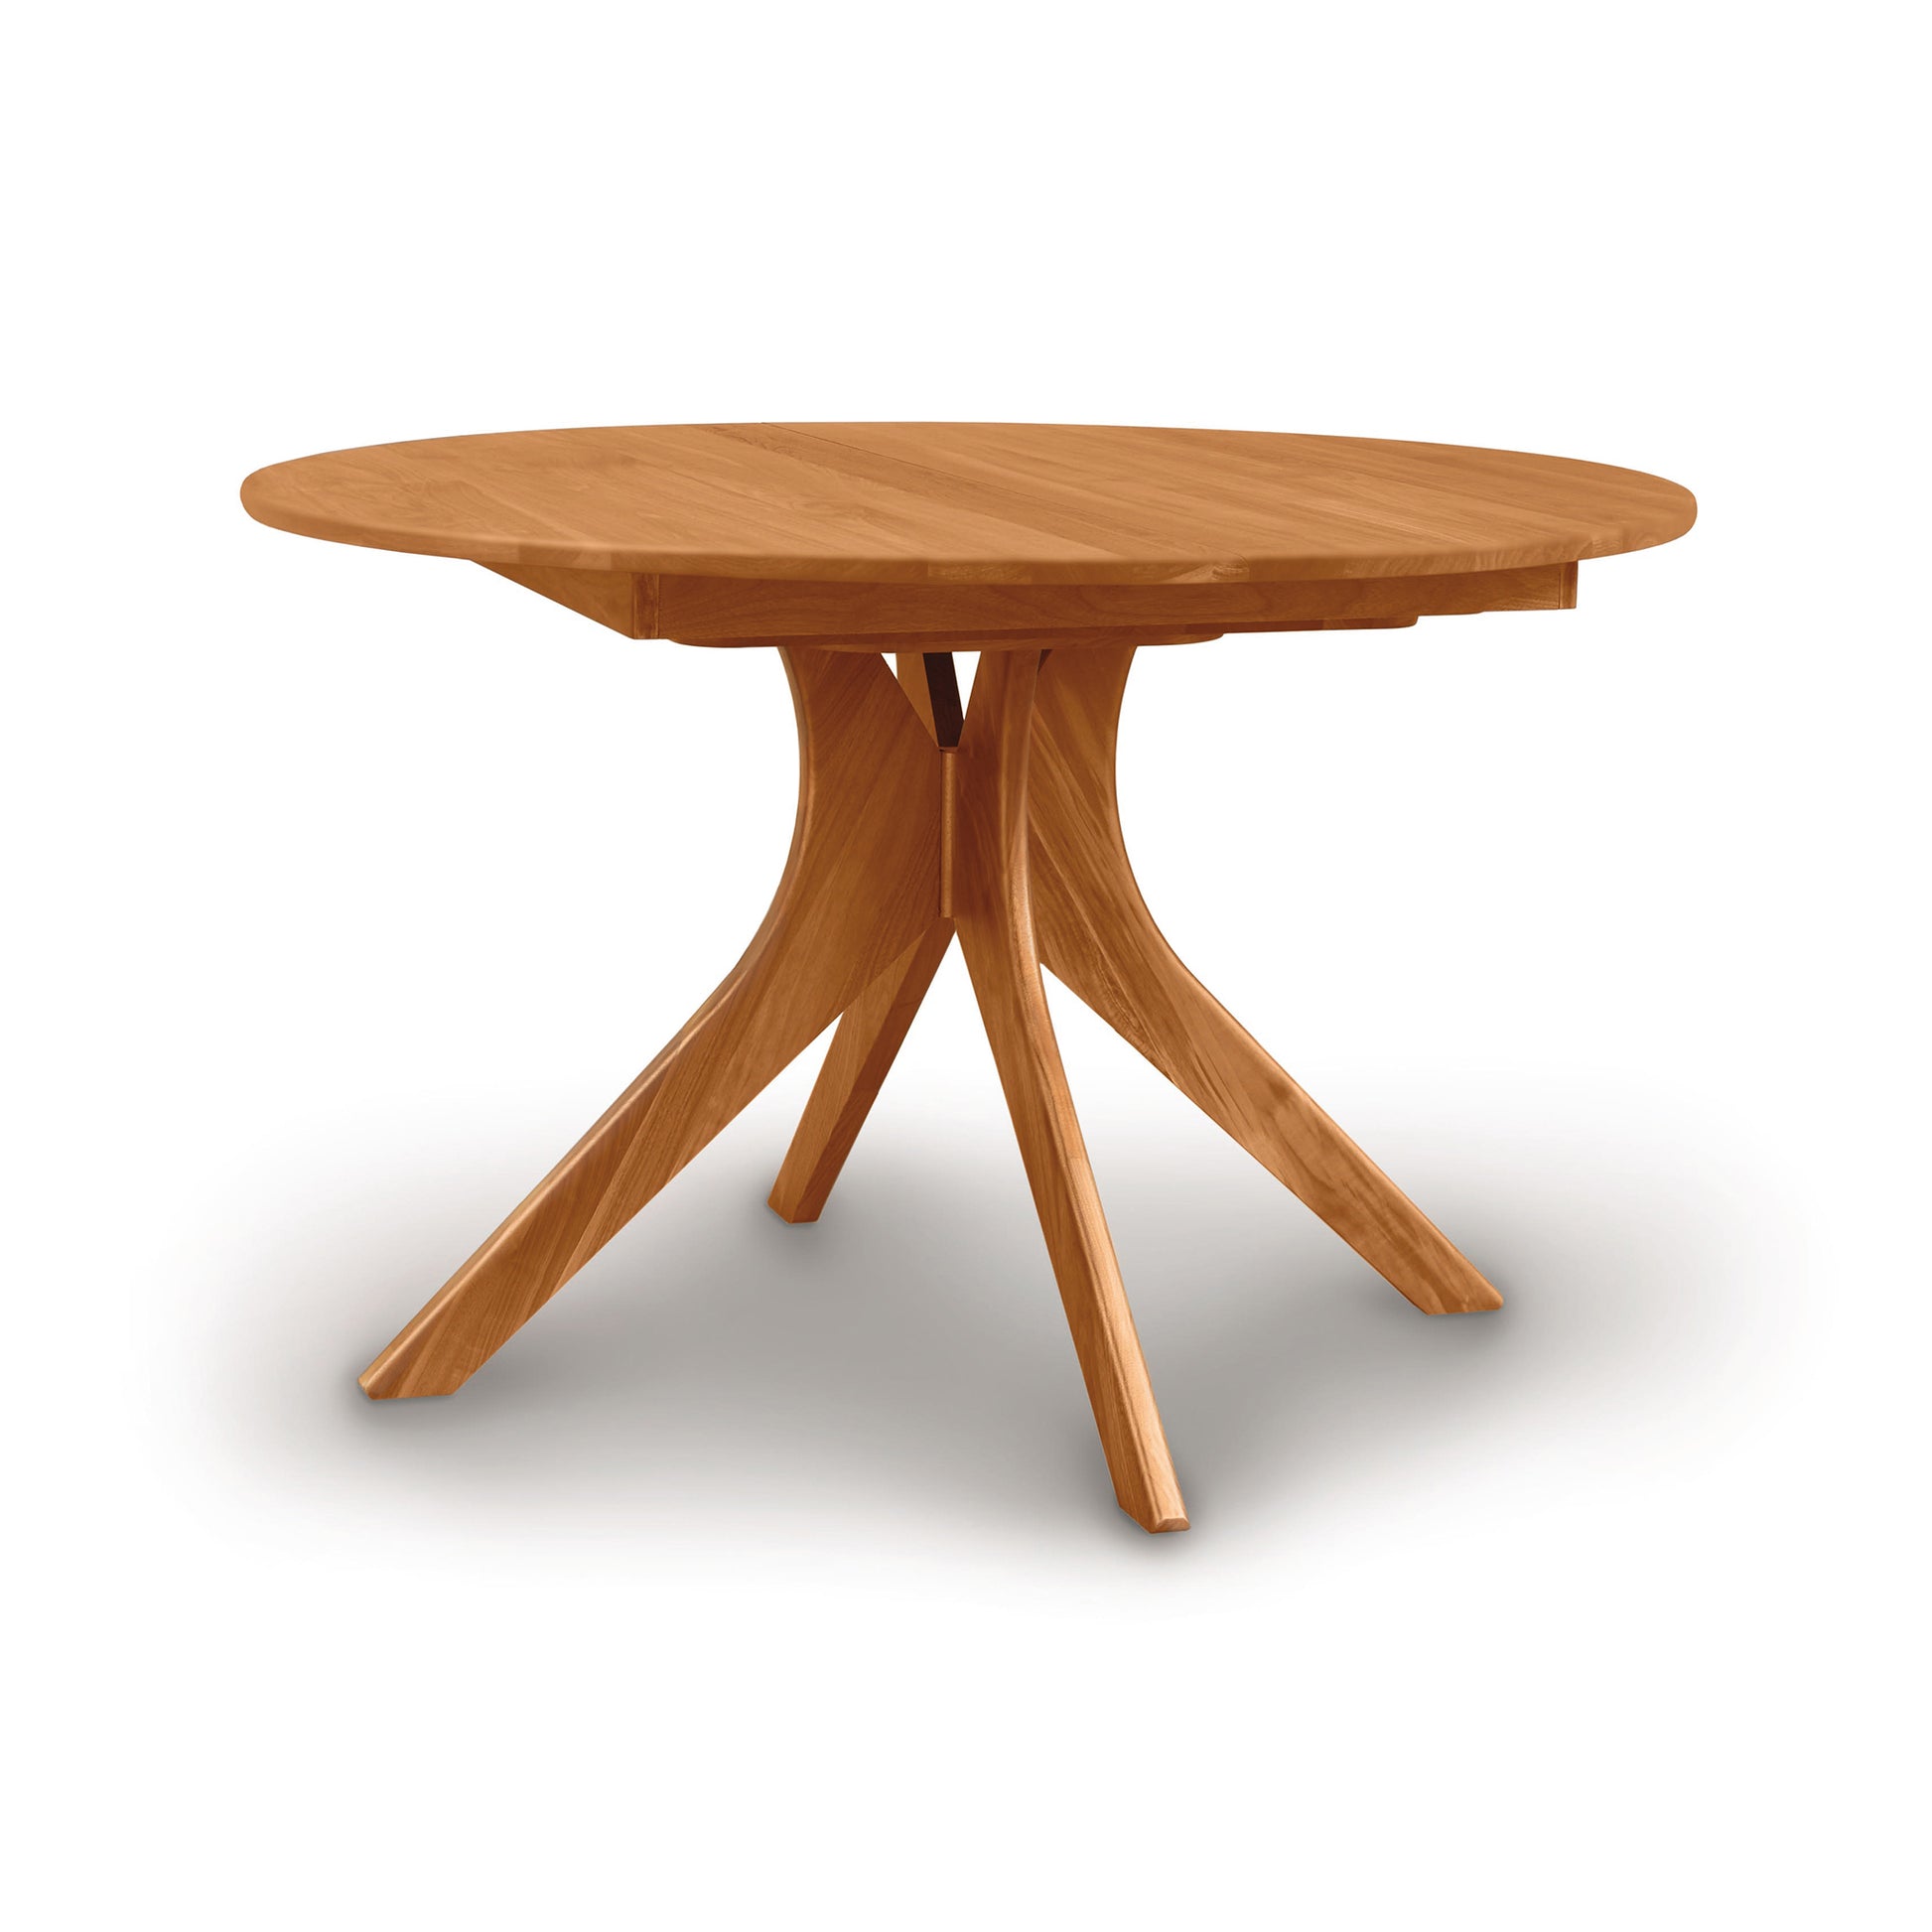 An Audrey Round Extension Dining Table with three legs by Copeland Furniture.